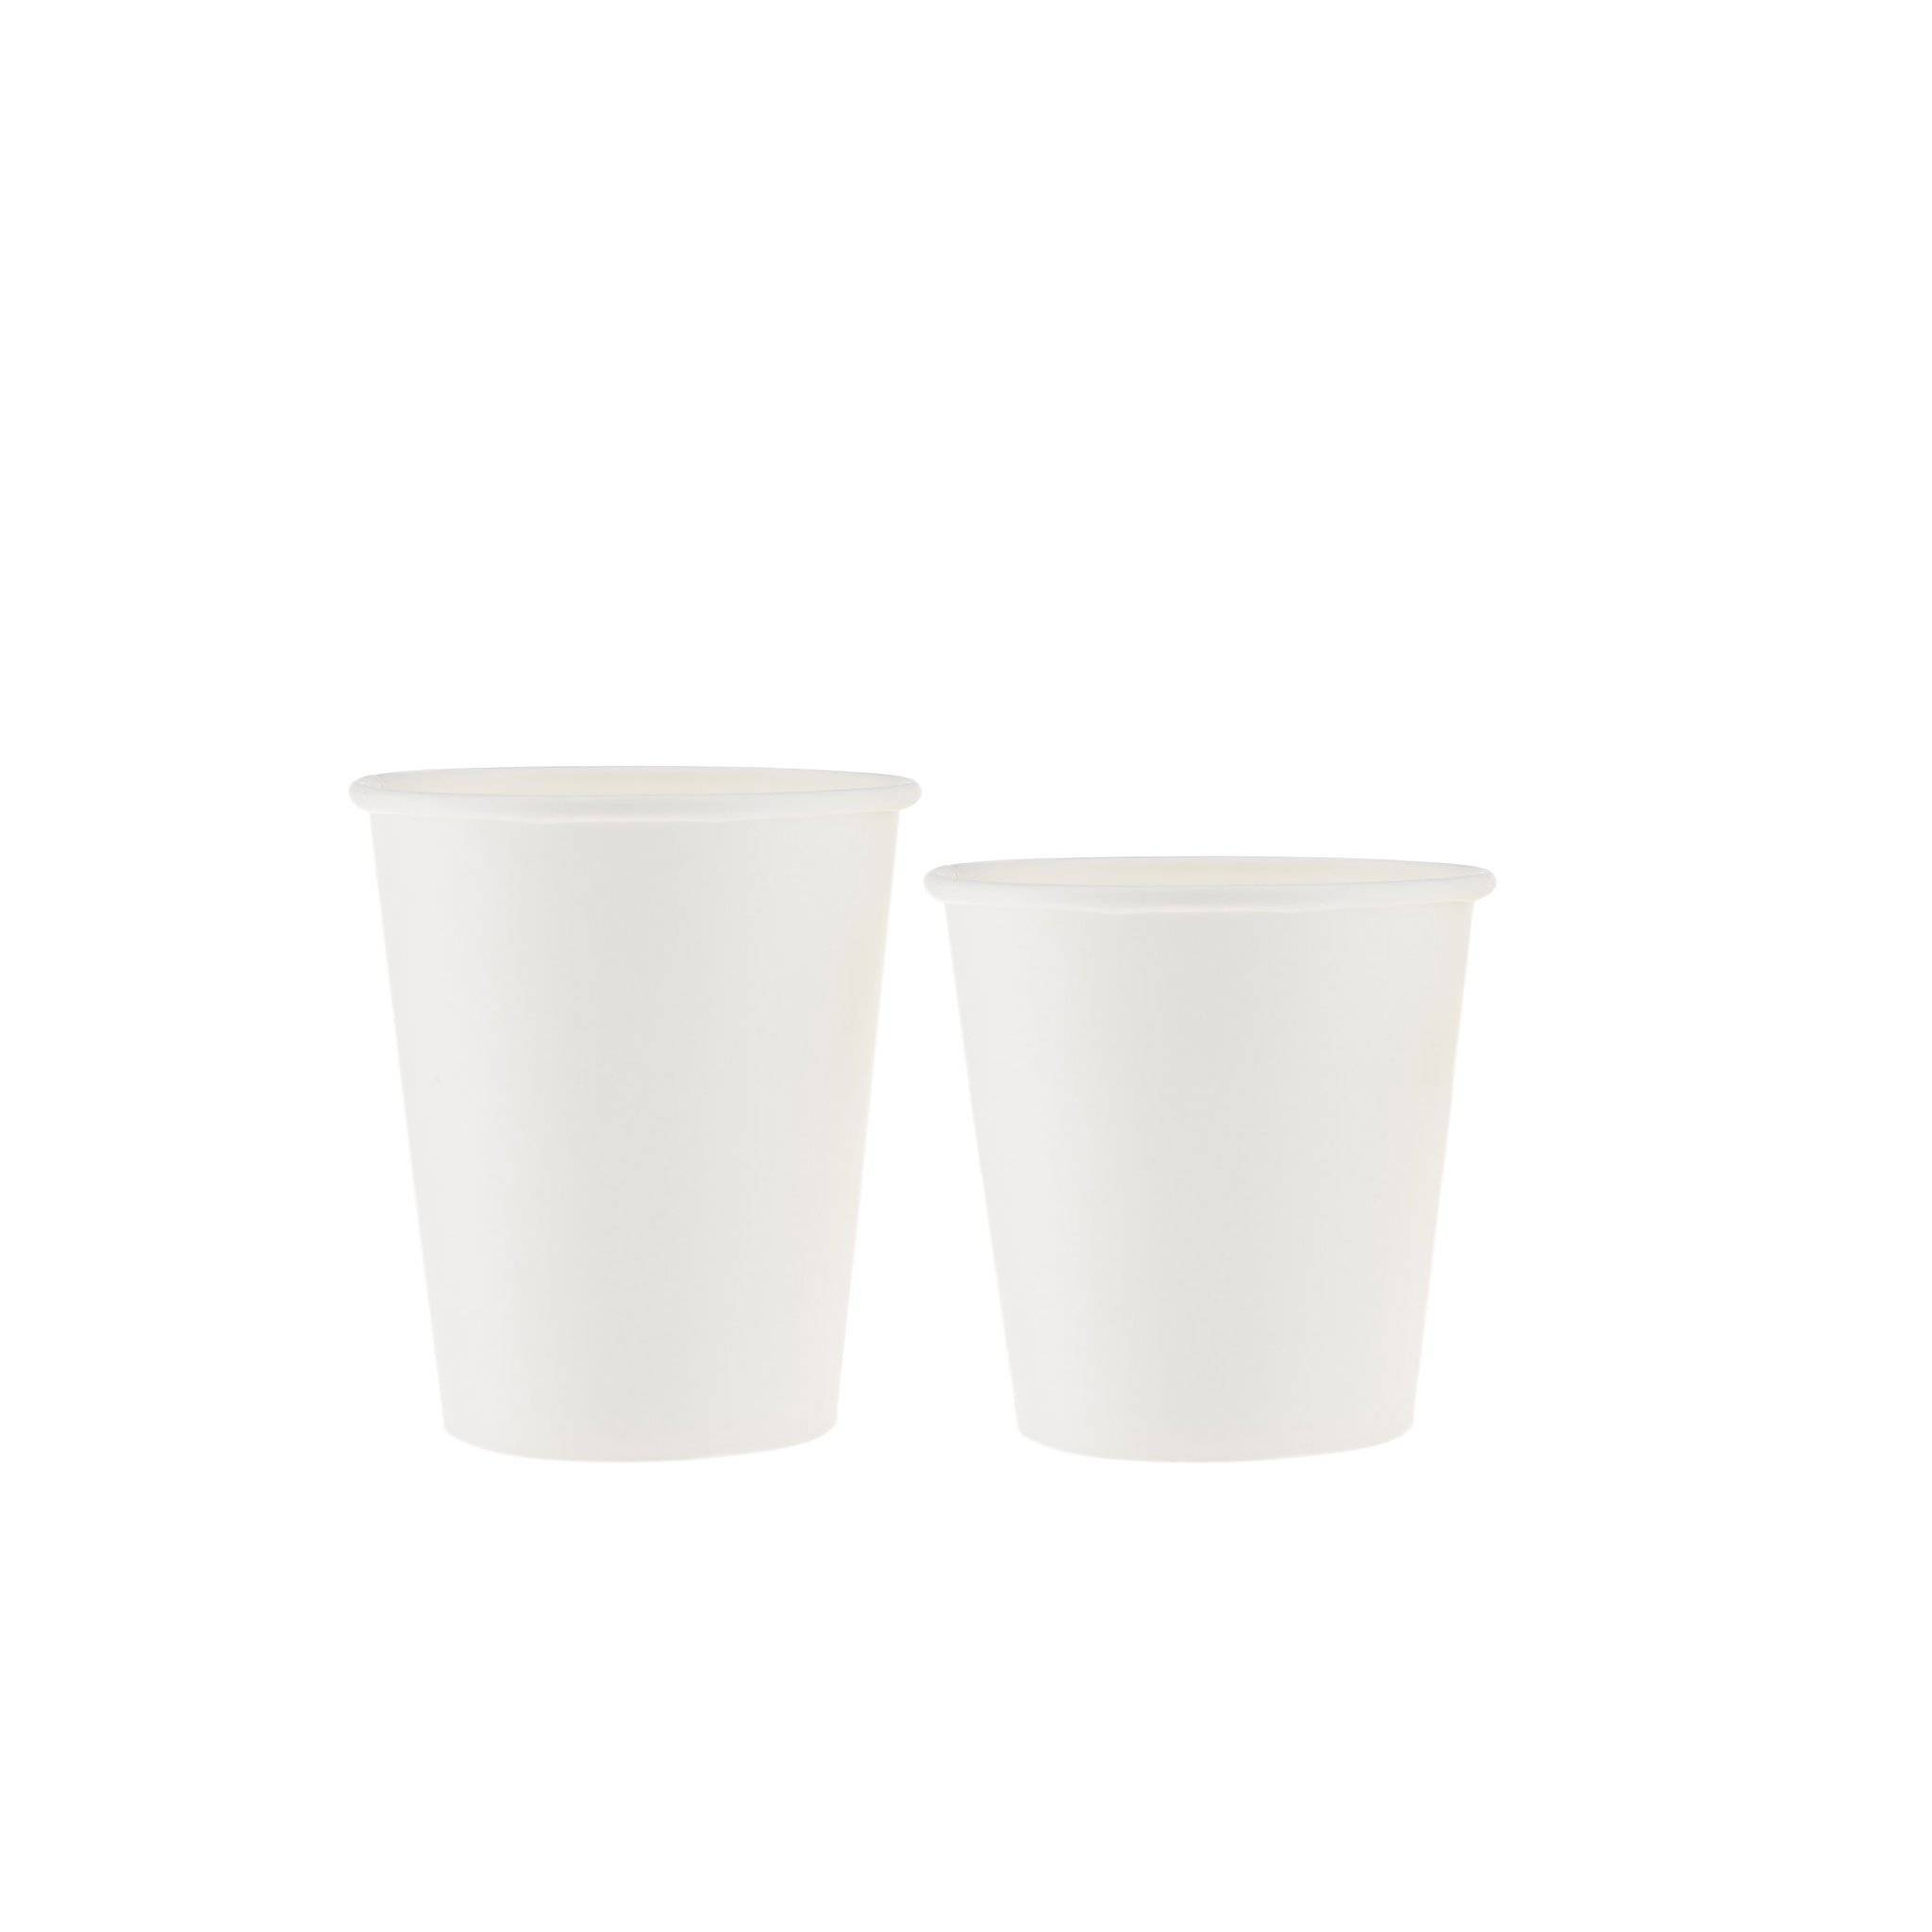 7oz single wall cups white (500 pieces) and 8oz single wall cups white (500 pieces) 26th Anniversary Combo - Hotpack Global